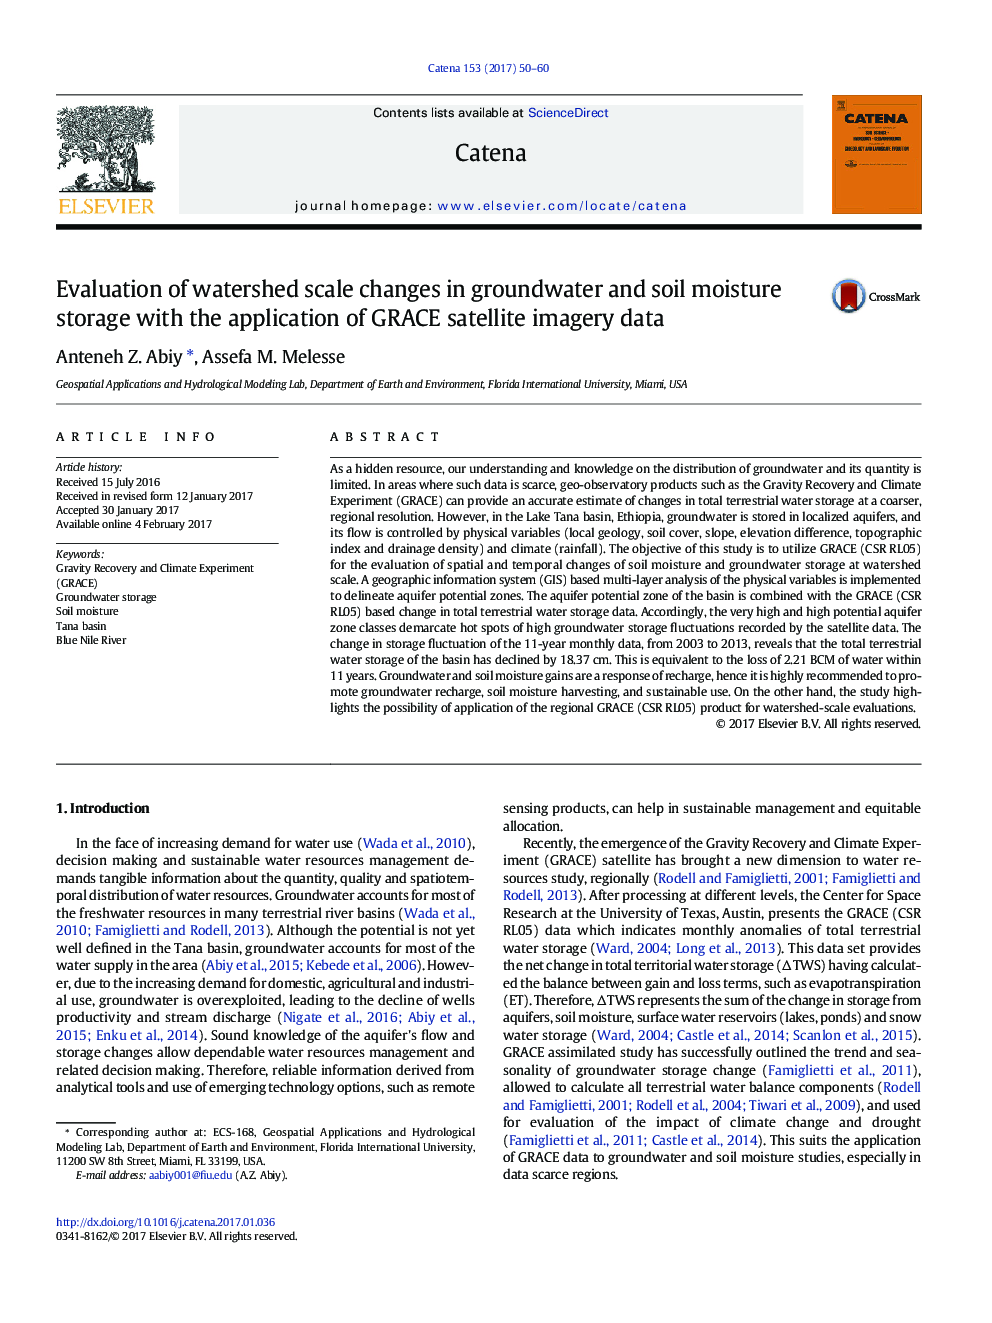 Evaluation of watershed scale changes in groundwater and soil moisture storage with the application of GRACE satellite imagery data